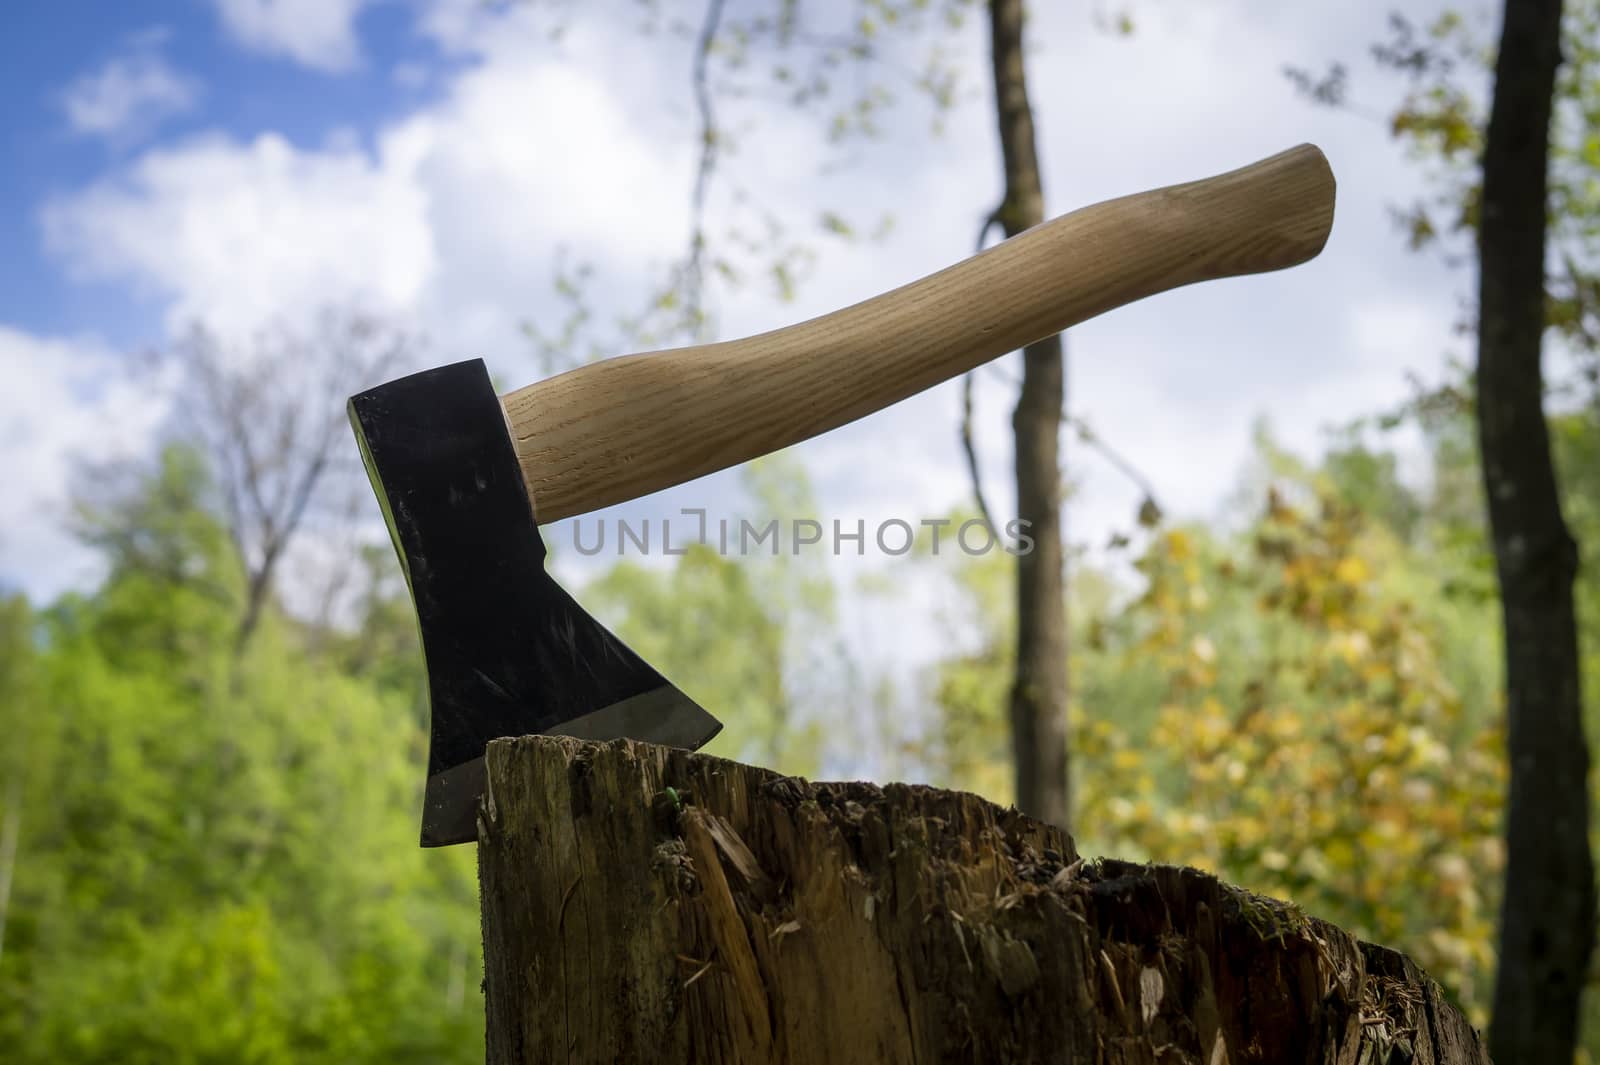 Chopper or axe standing upright in an old tree stump outdoors against a woodland background in spring under a cloudy blue sky